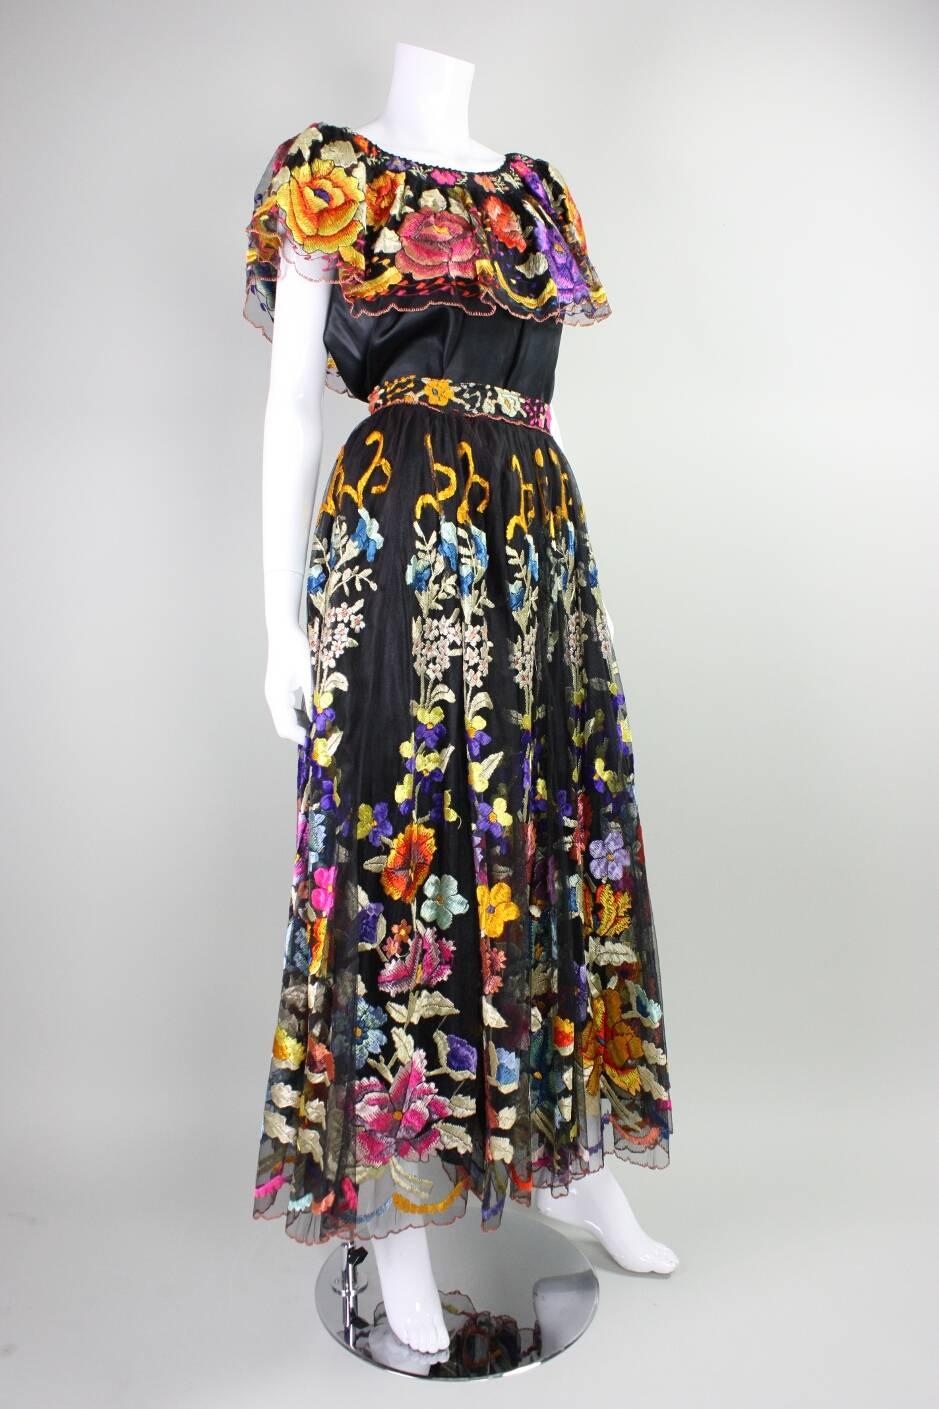 Vintage wedding ensemble from Mexico likely dates to the mid 20th century.  It is made of black net over a synthetic black fabric and features brightly colored floral hand embroidery throughout the full skirt and the ruffle of the neckline. Blouse